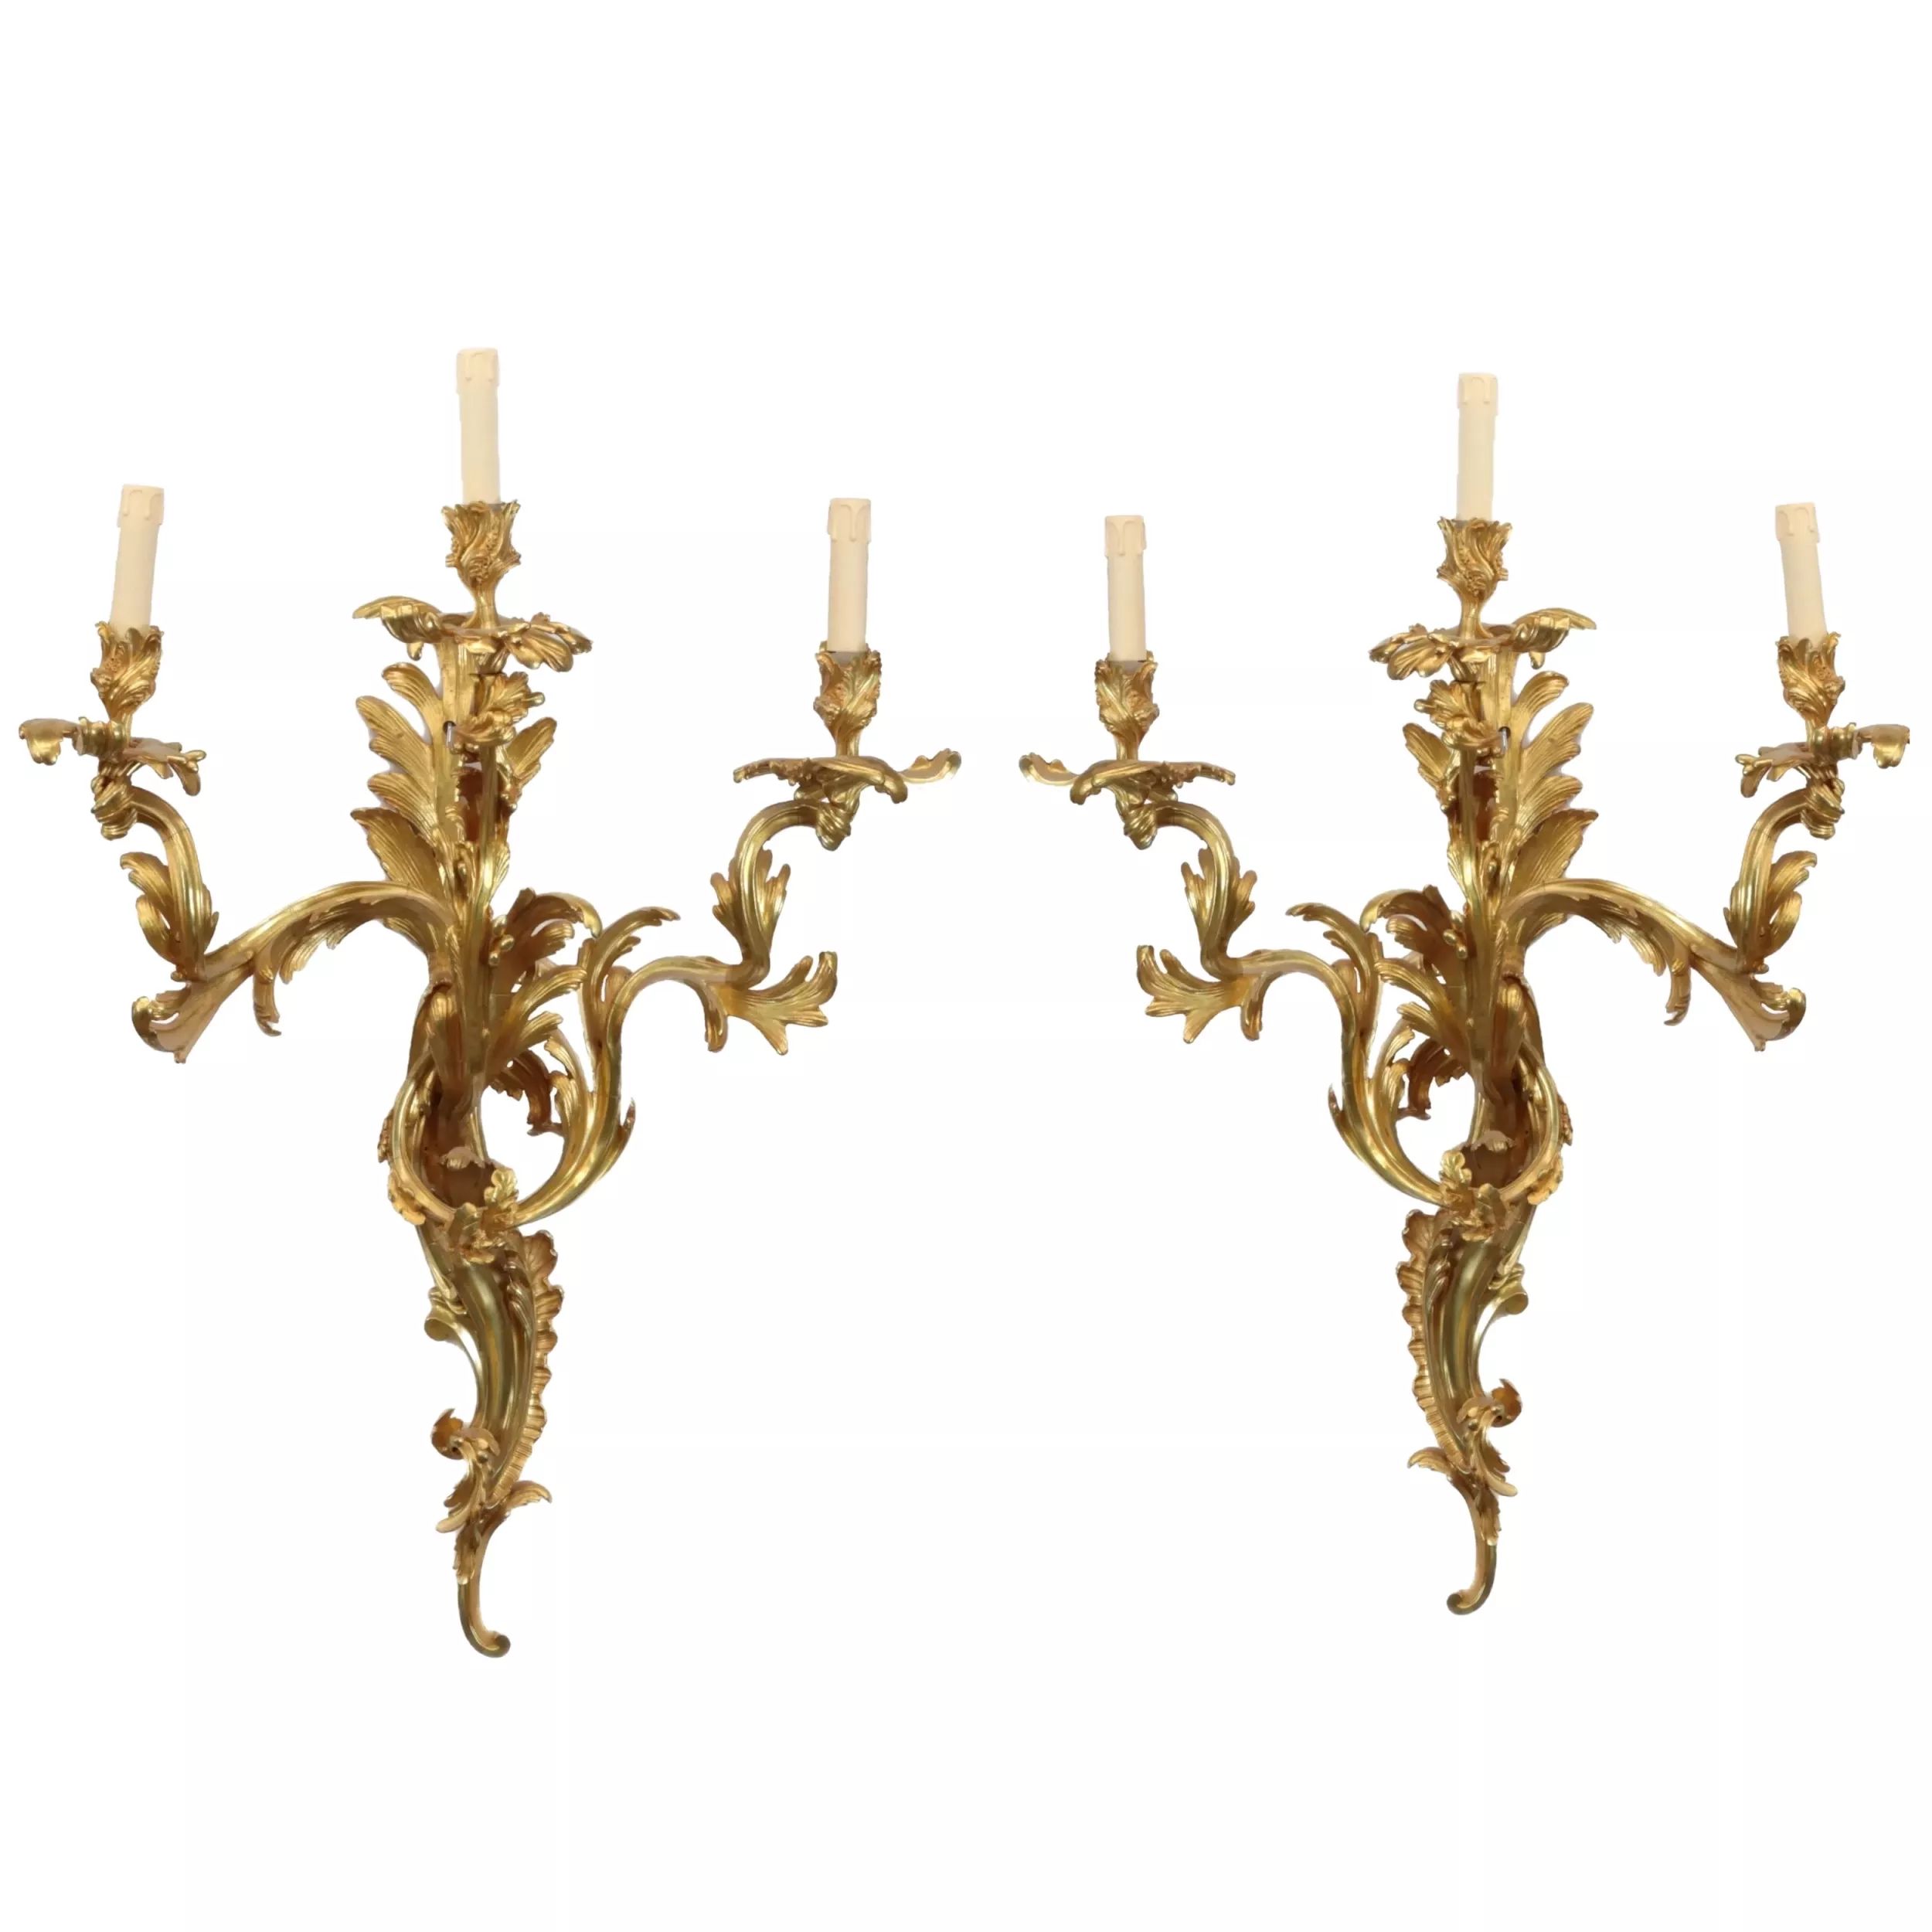 Pair-of--wall-sconces-Rococo-style-